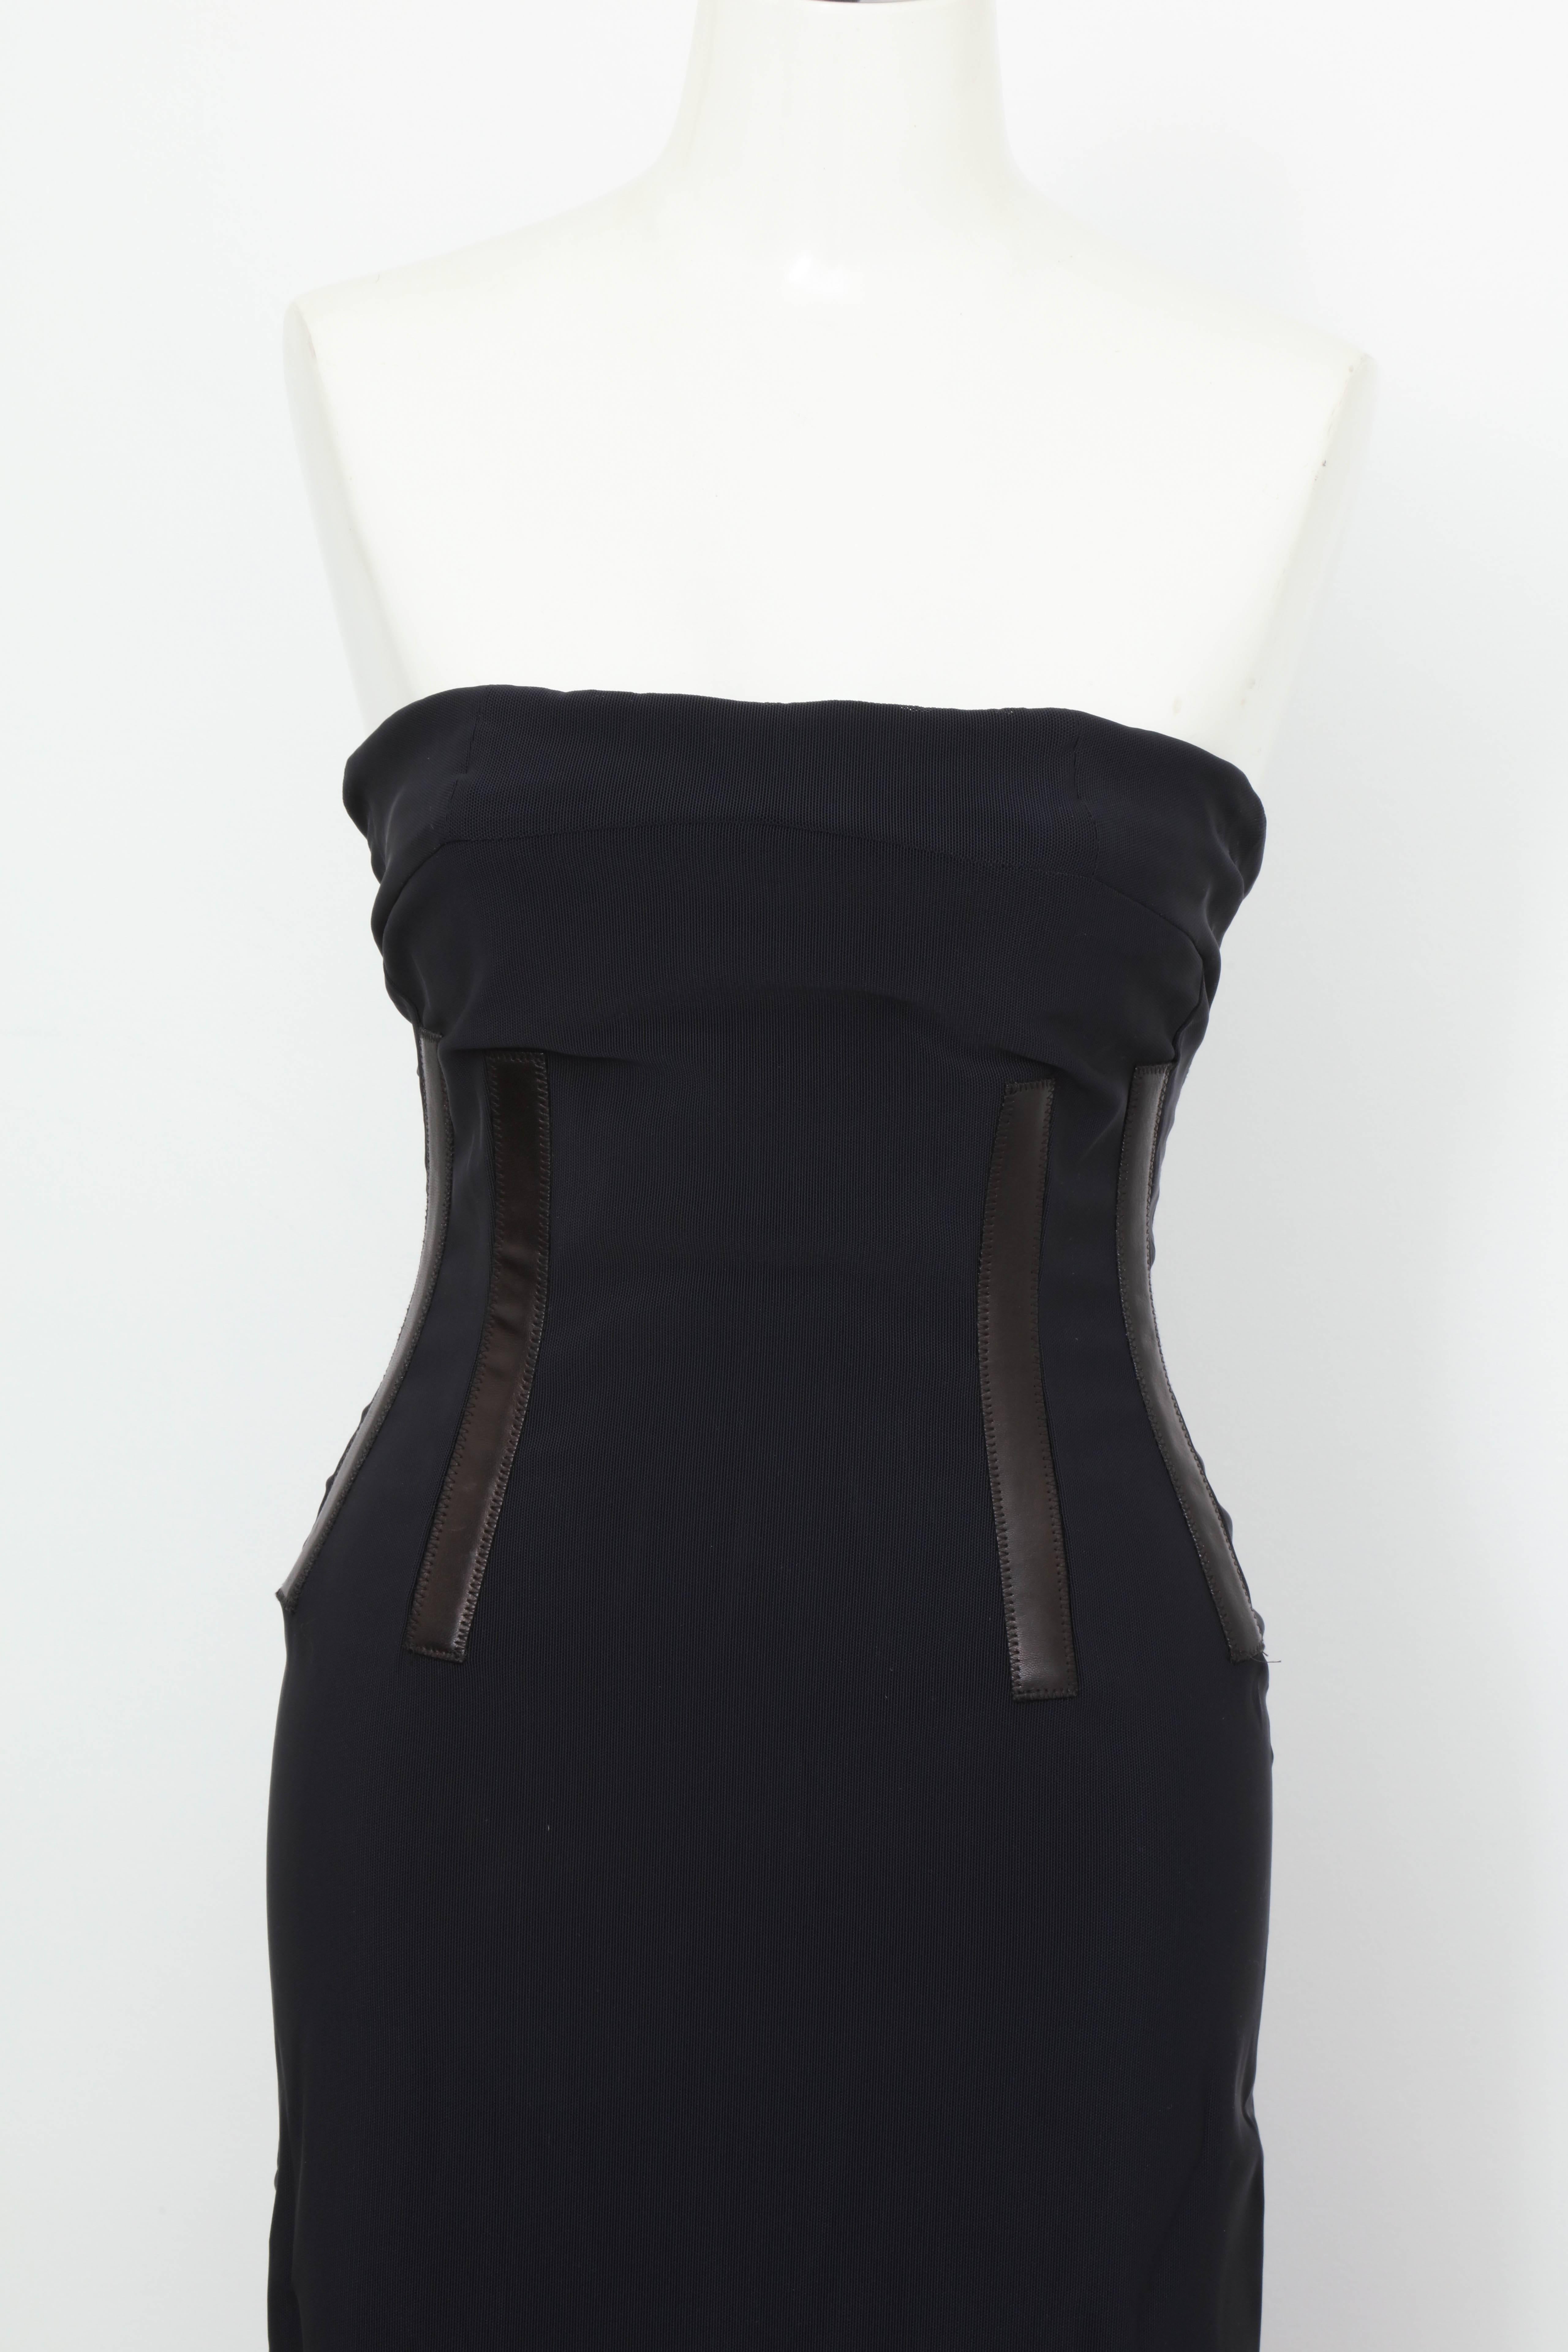 Beautiful Gucci black tube corset dress with leather inserts. Possibly by Tom Ford.

Size: 40, Fits like US 0-2